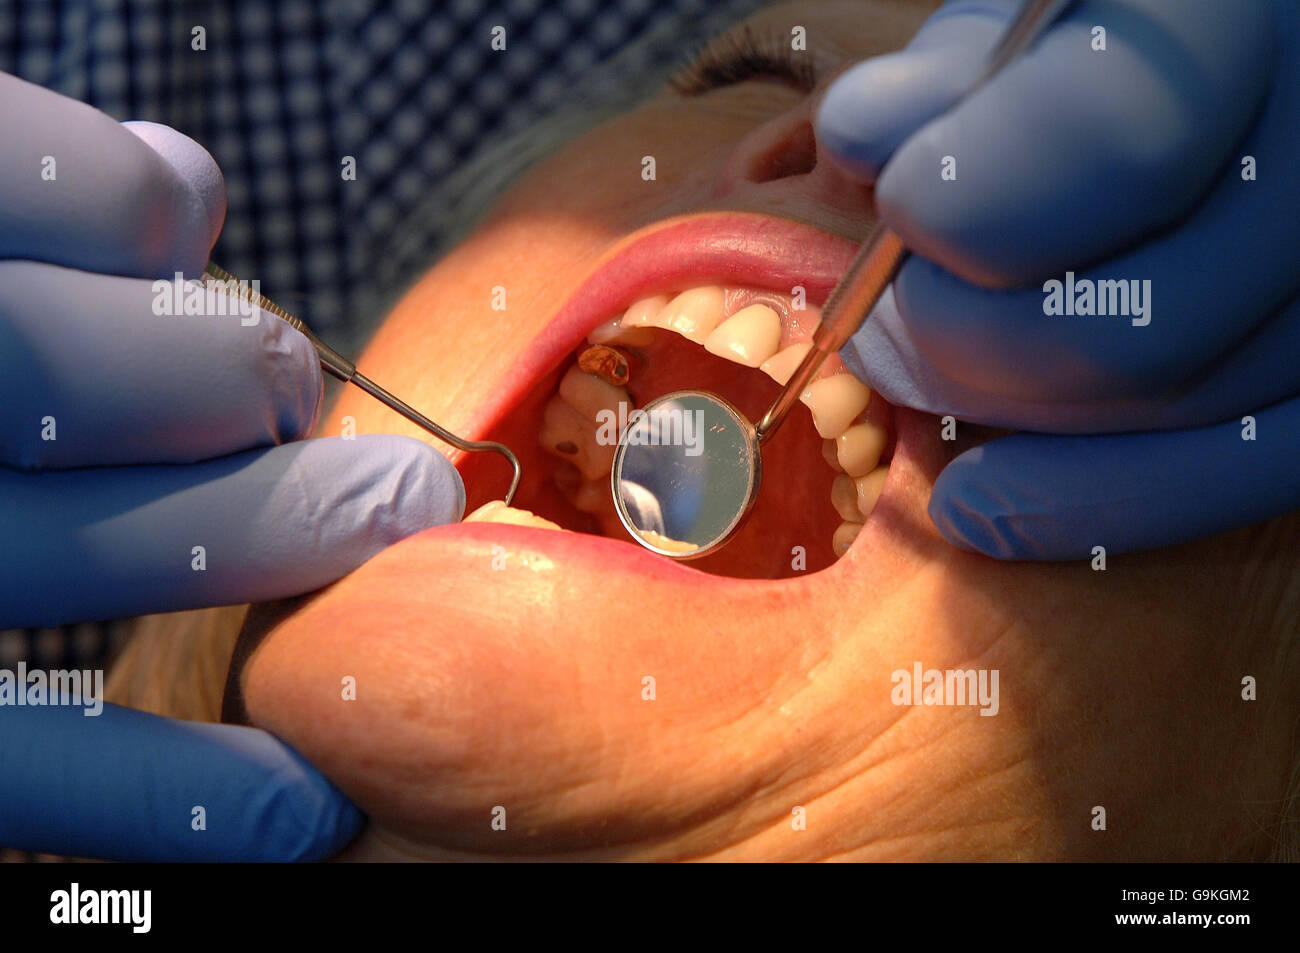 Checking condition of teeth with a visit to the dentist. Stock Photo